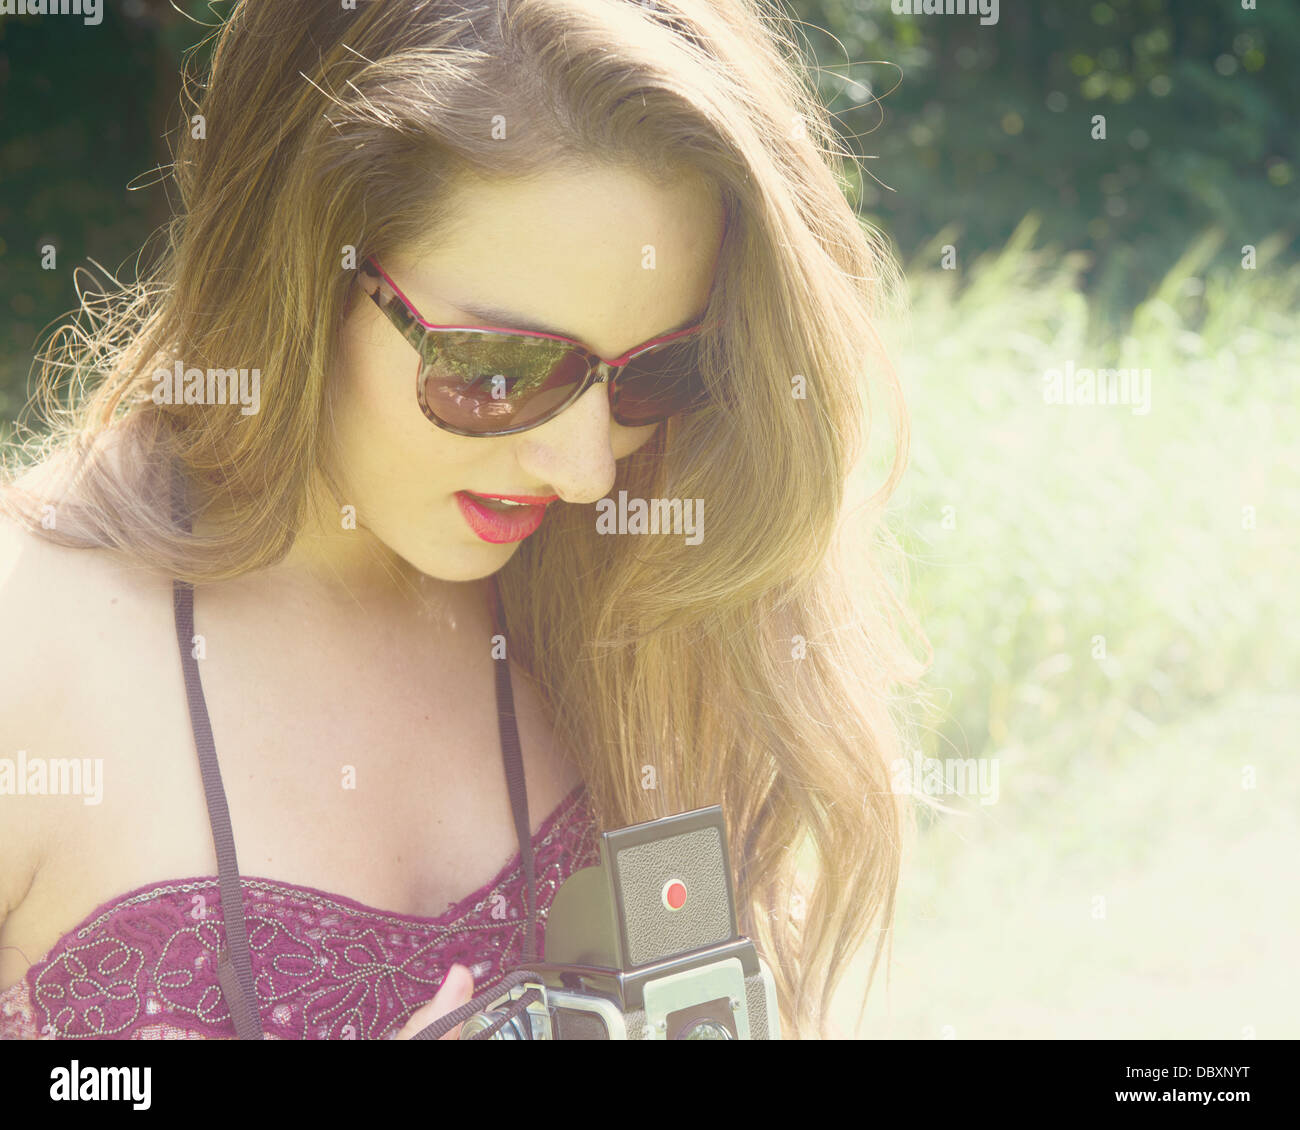 Young woman wearing sunglasses taking a photograph with a vintage camera. Stock Photo